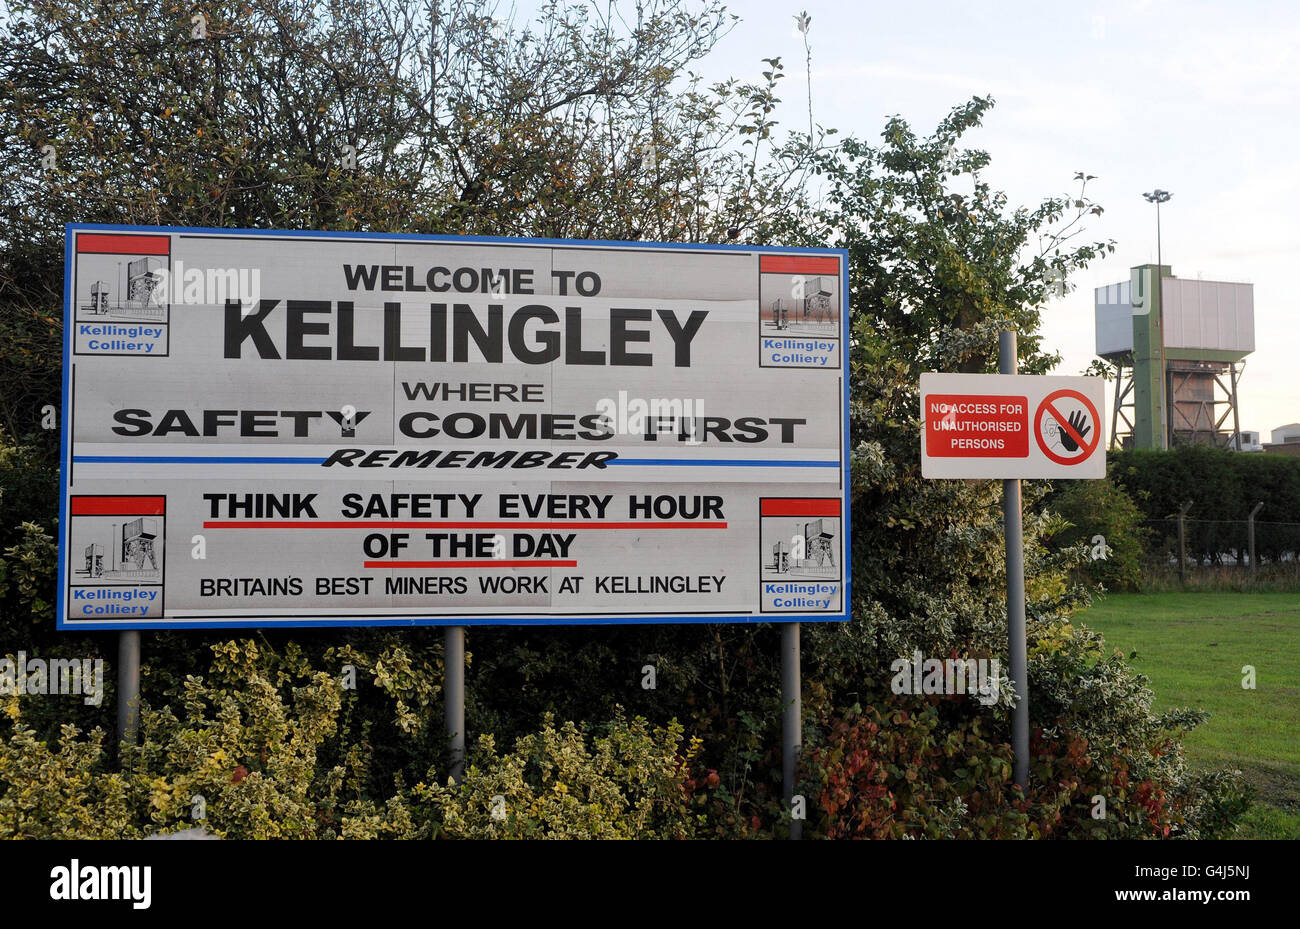 A general view of the Kellingley Colliery in Knottingley, where two miners were reported trapped. Stock Photo